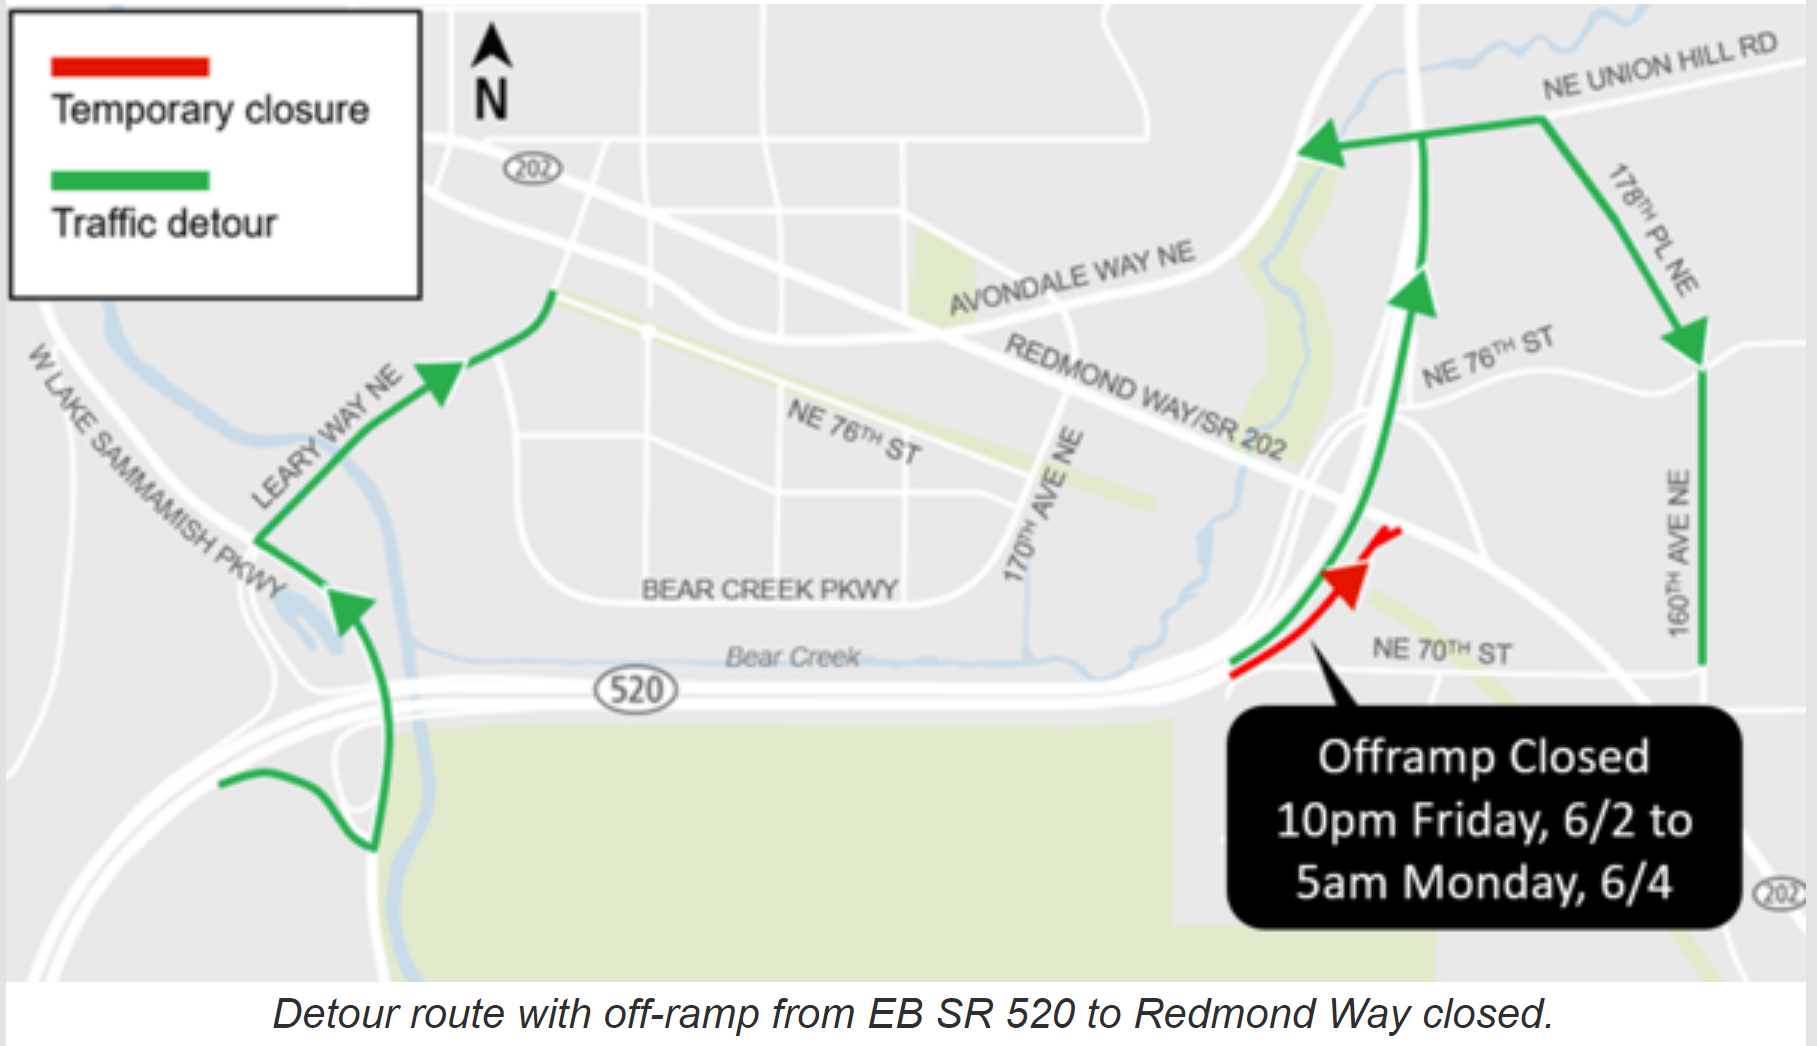 Map showing where State Route 520 off-ramp to Redmond Way is to be closed from 10:00 p.m. Friday, June 2nd to 5:00 a.m. Monday, June 4th and the detour route Leary Way NE.